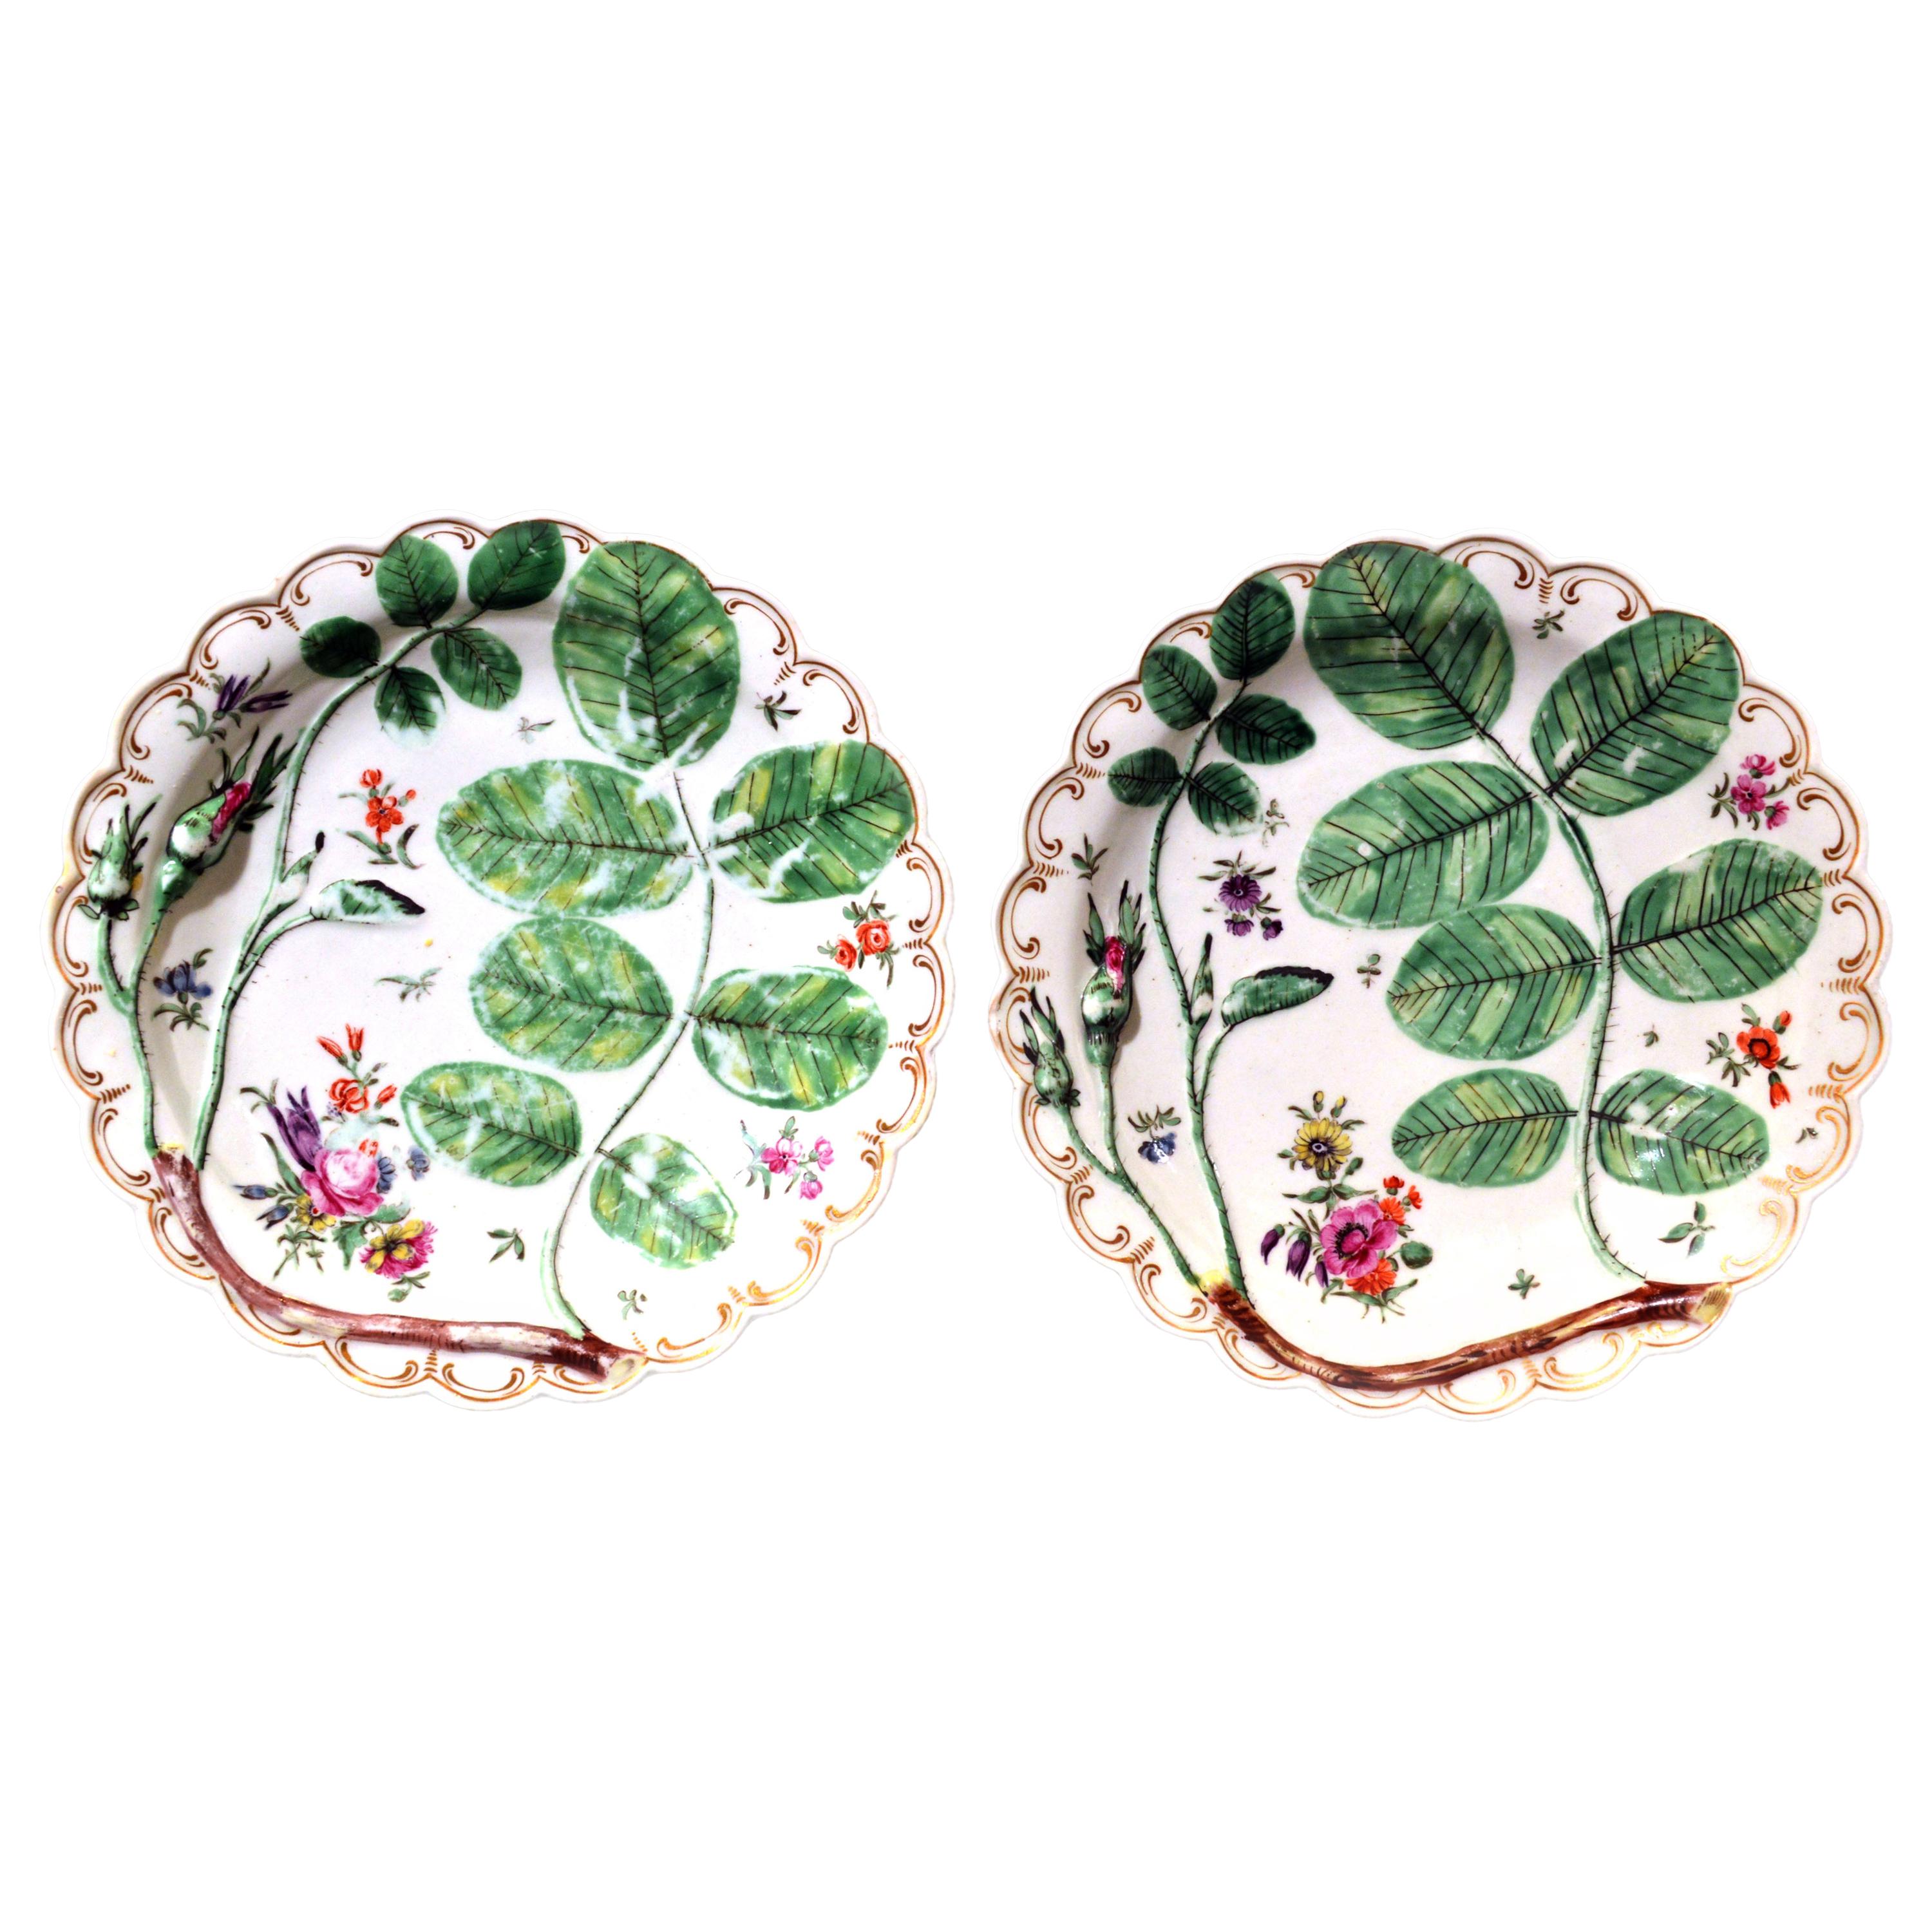 First Period Worcester Pair of Blind Earl Porcelain Dishes, circa 1770